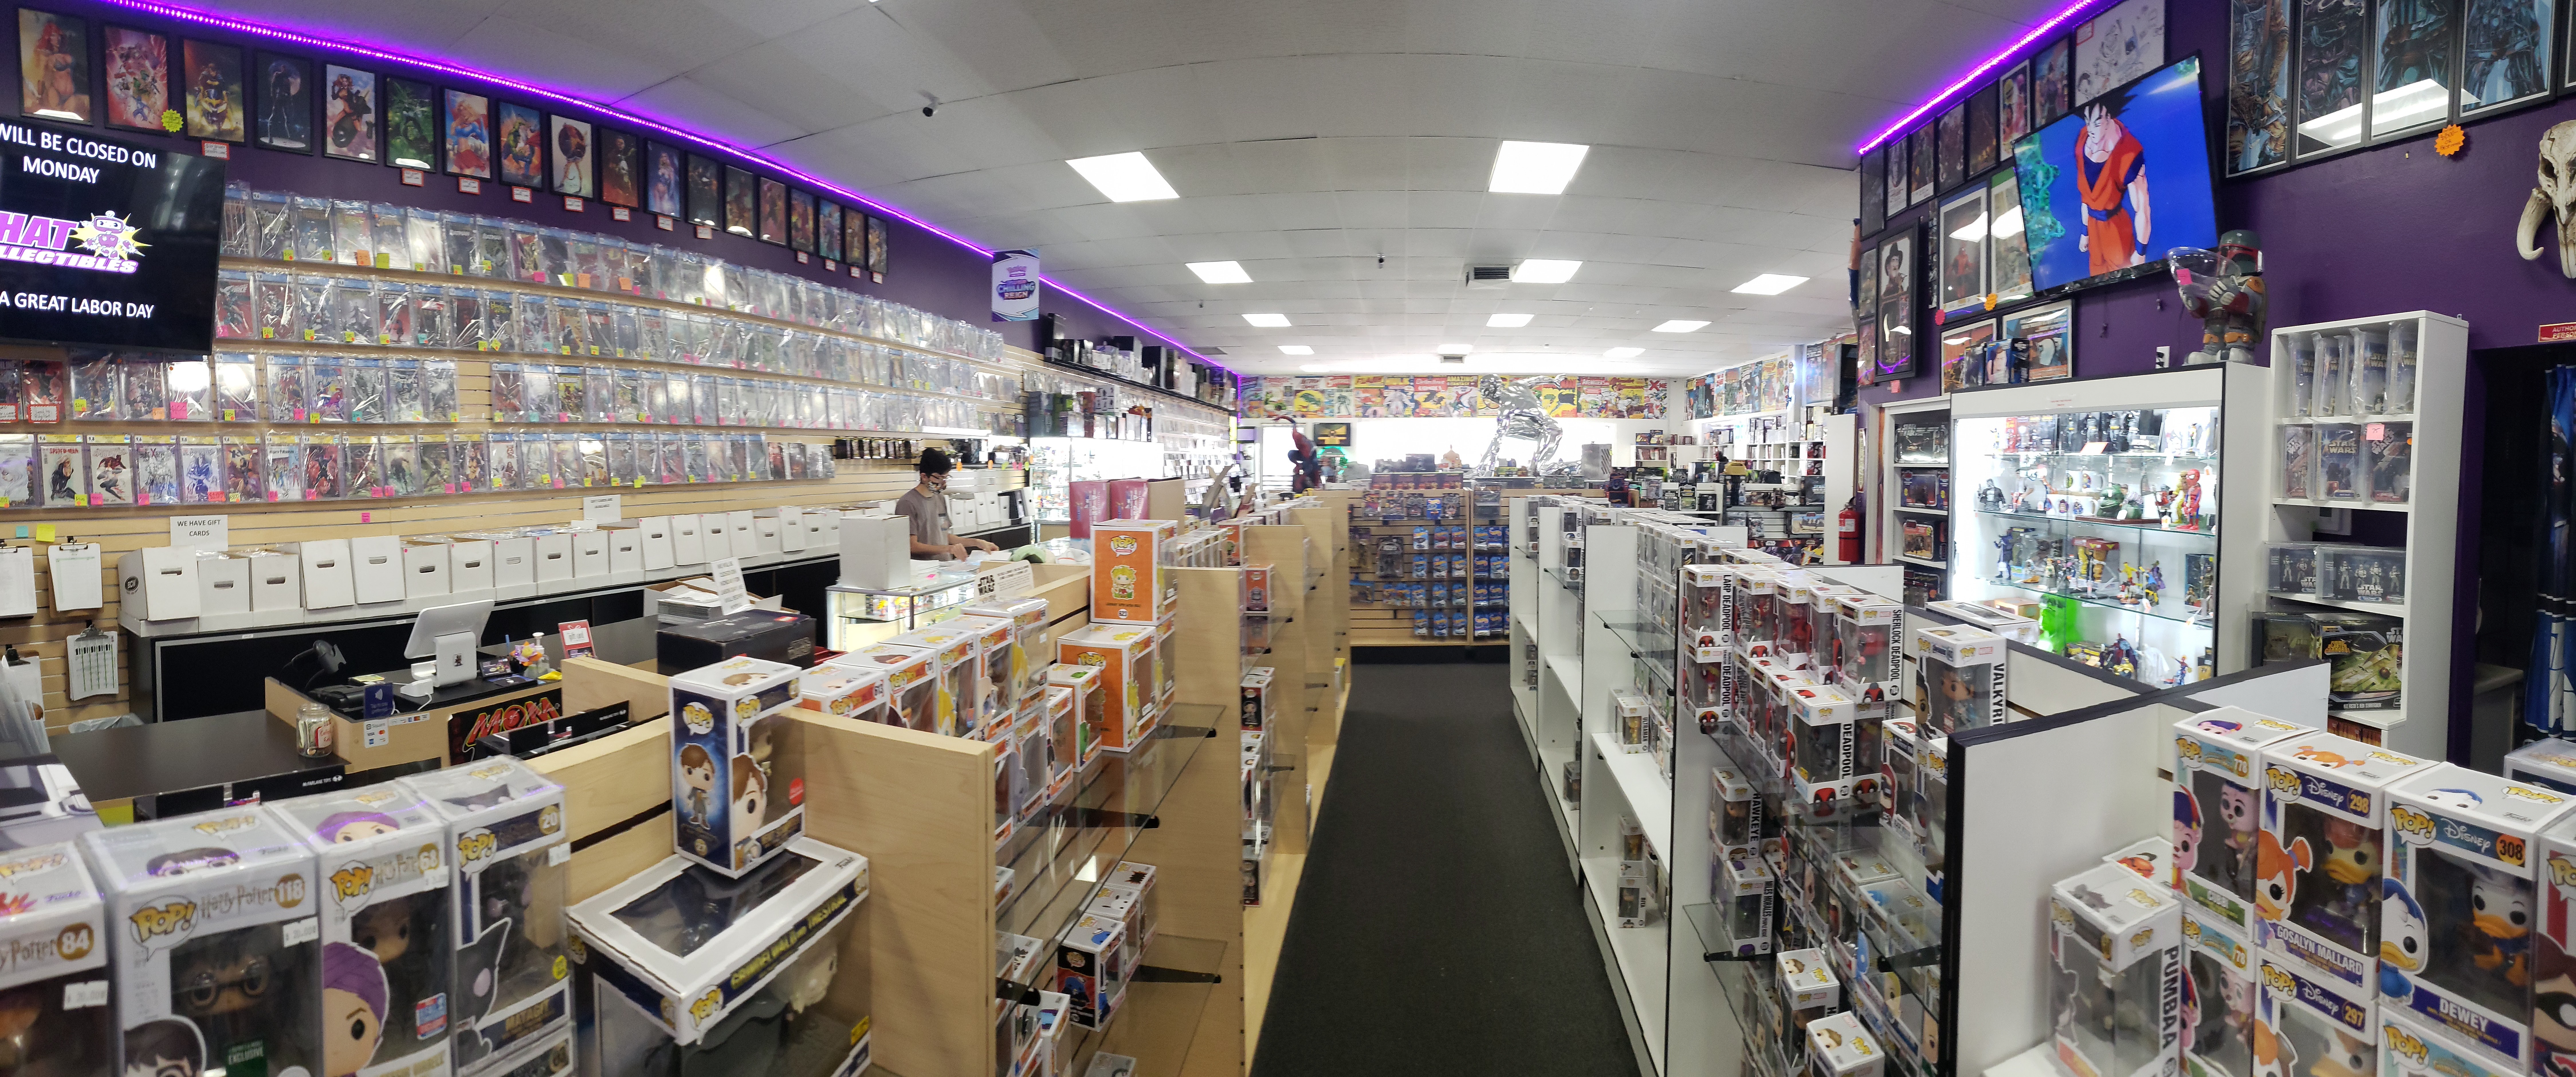 Picture of a place: Phat Collectibles